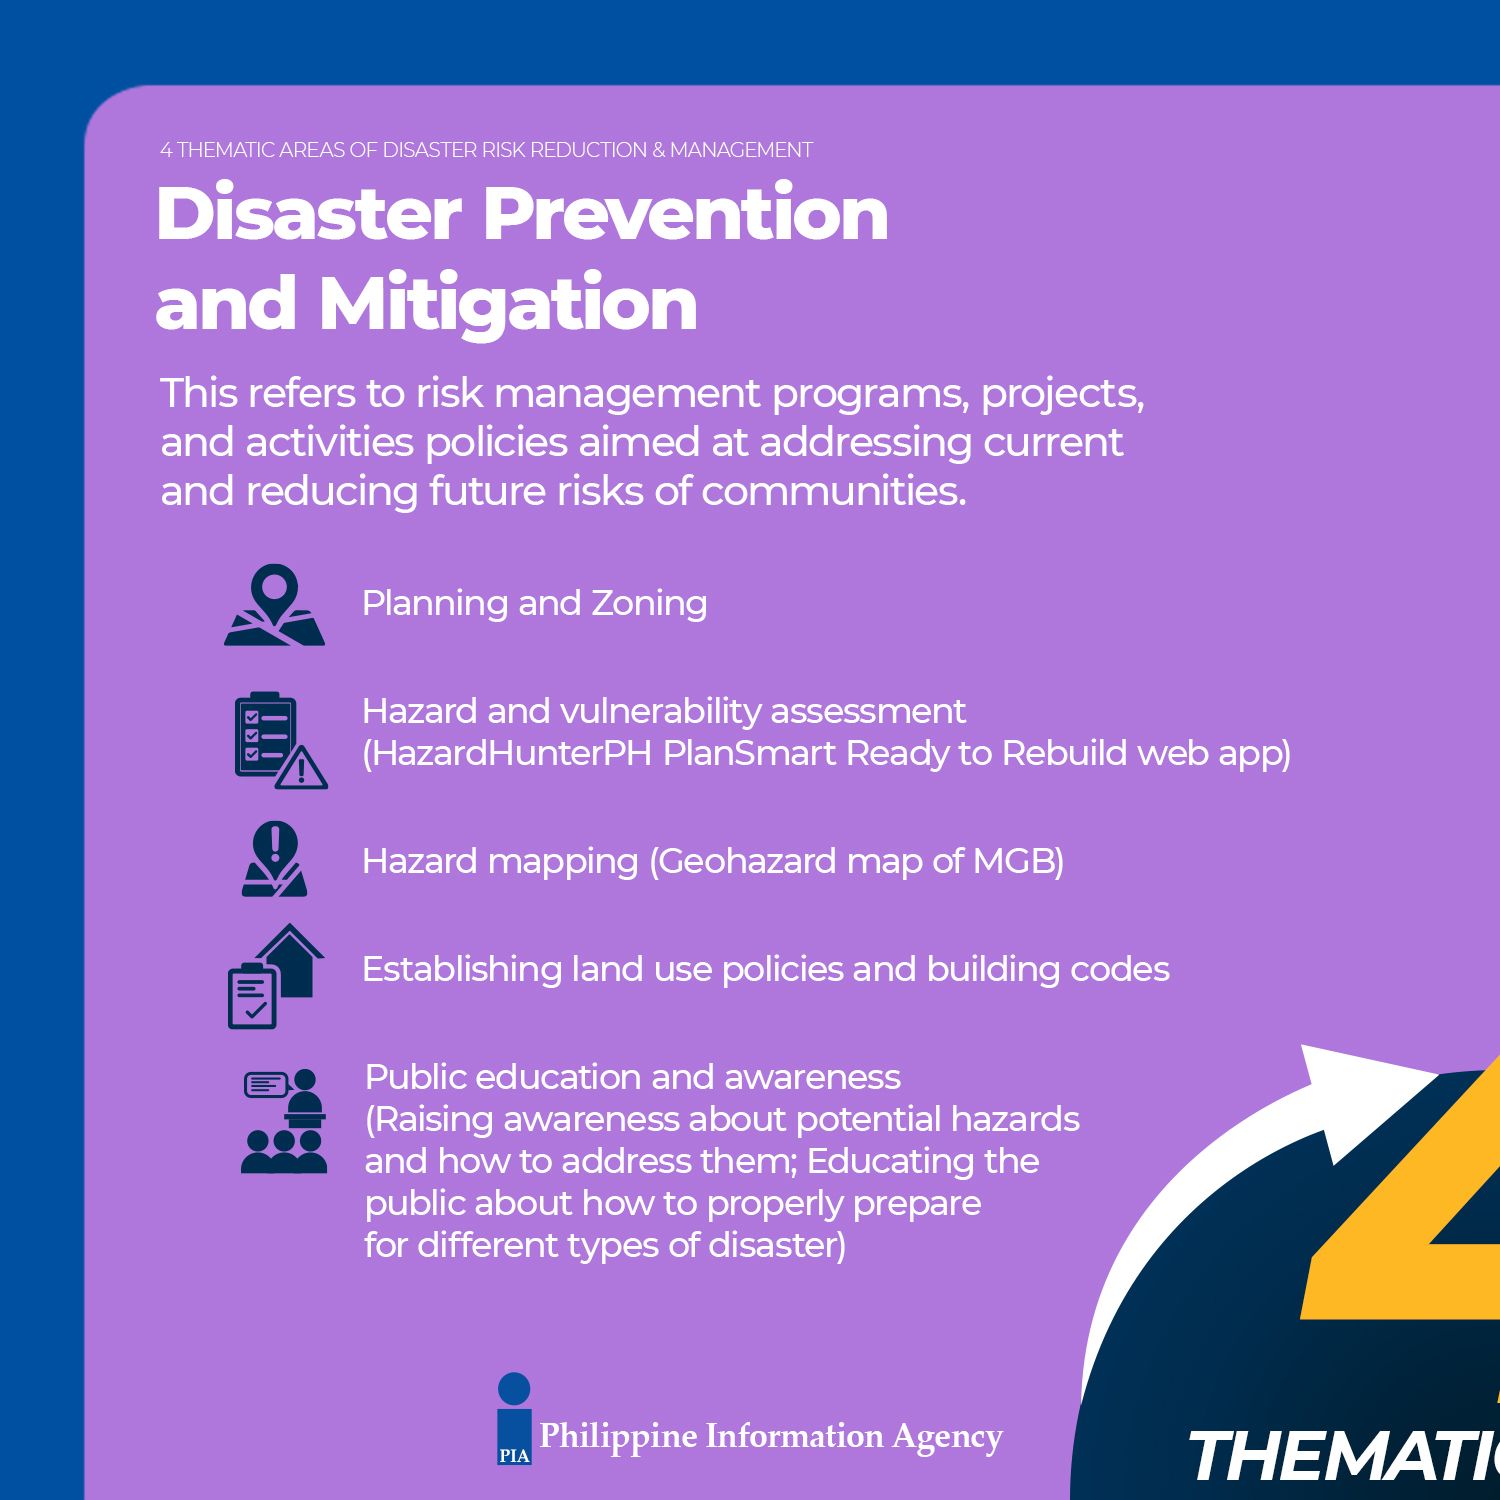 disaster risk reduction management essay brainly